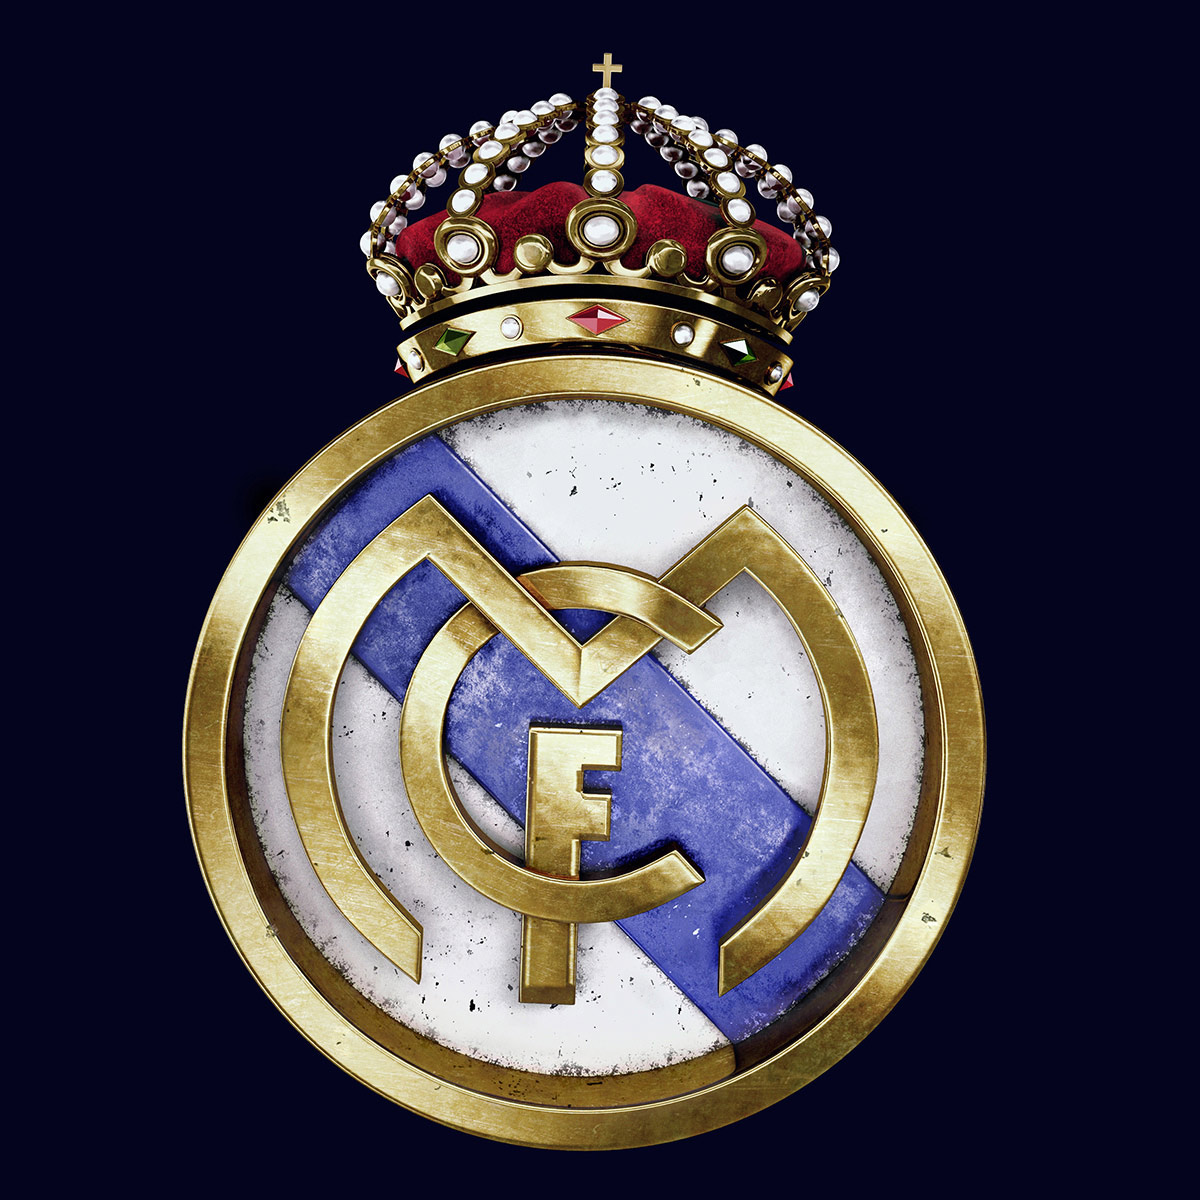 Champions League Clubs Badges on Behance